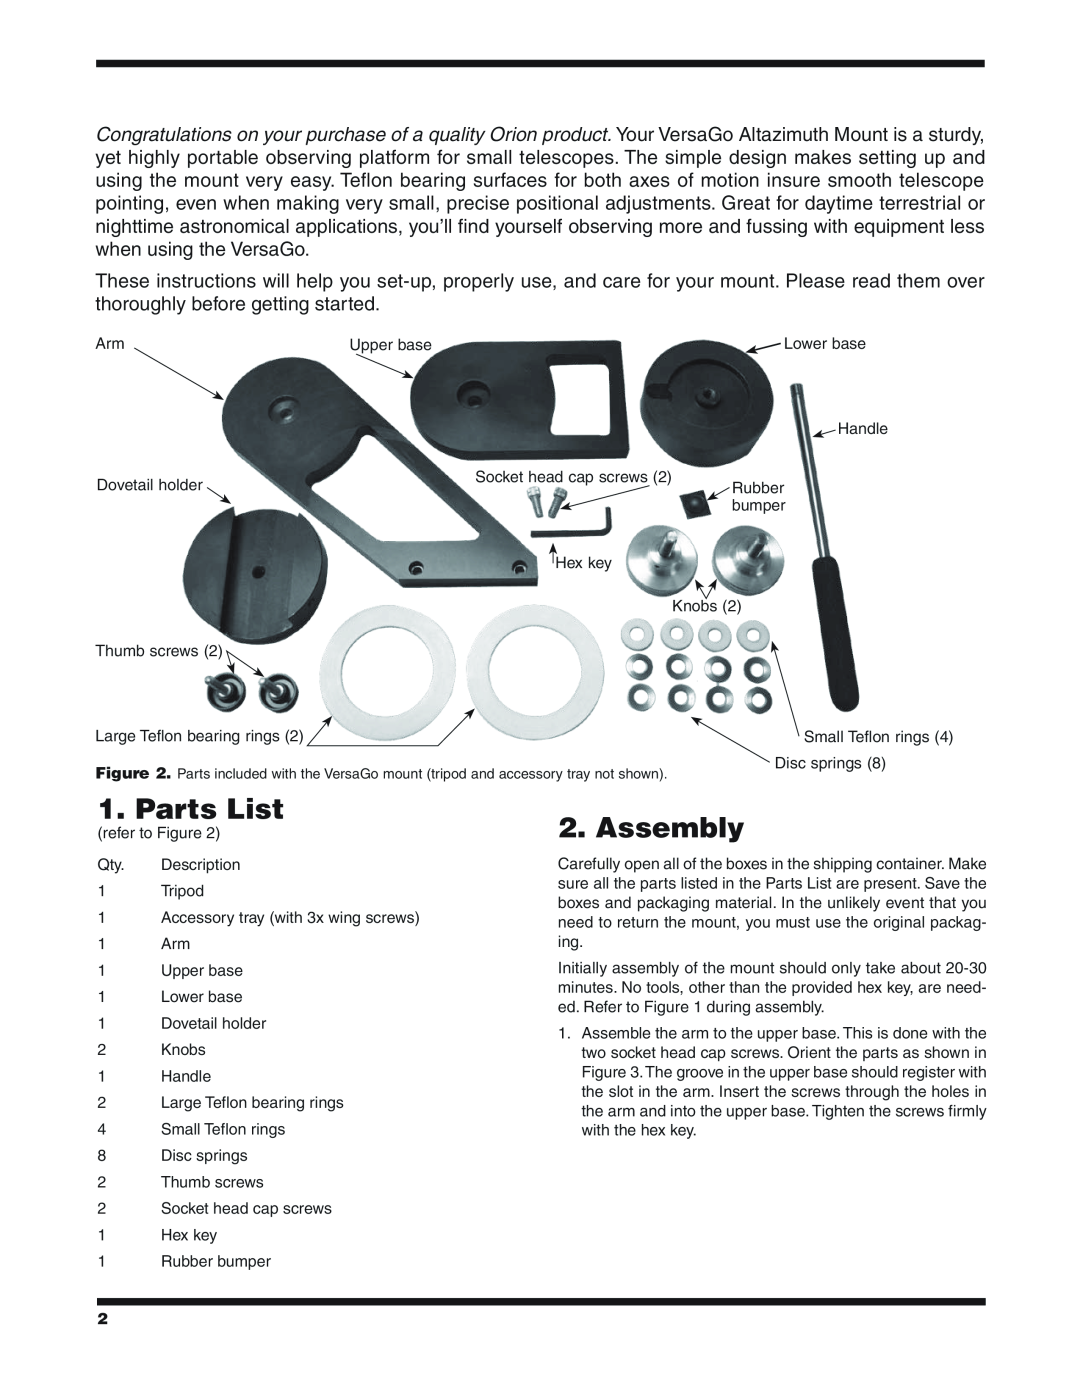 Orion #5682 Parts List, Assembly, Upper base, Socket head cap screws, Accessory tray with 3x wing screws, Rubber bumper 